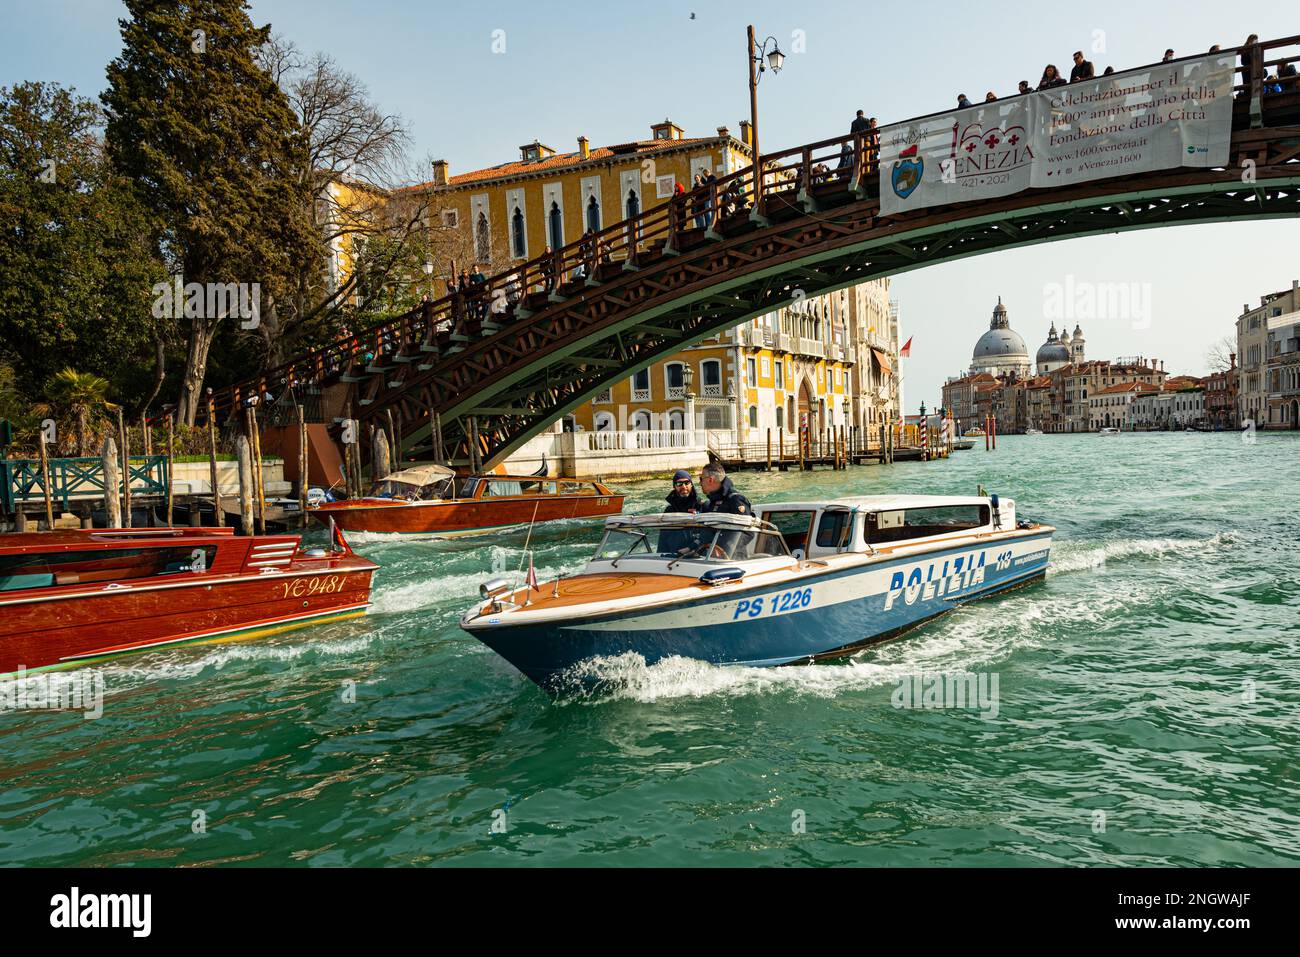 Venice Italy February 21-2022 Italian state police boat in the grand canal of Venice Stock Photo